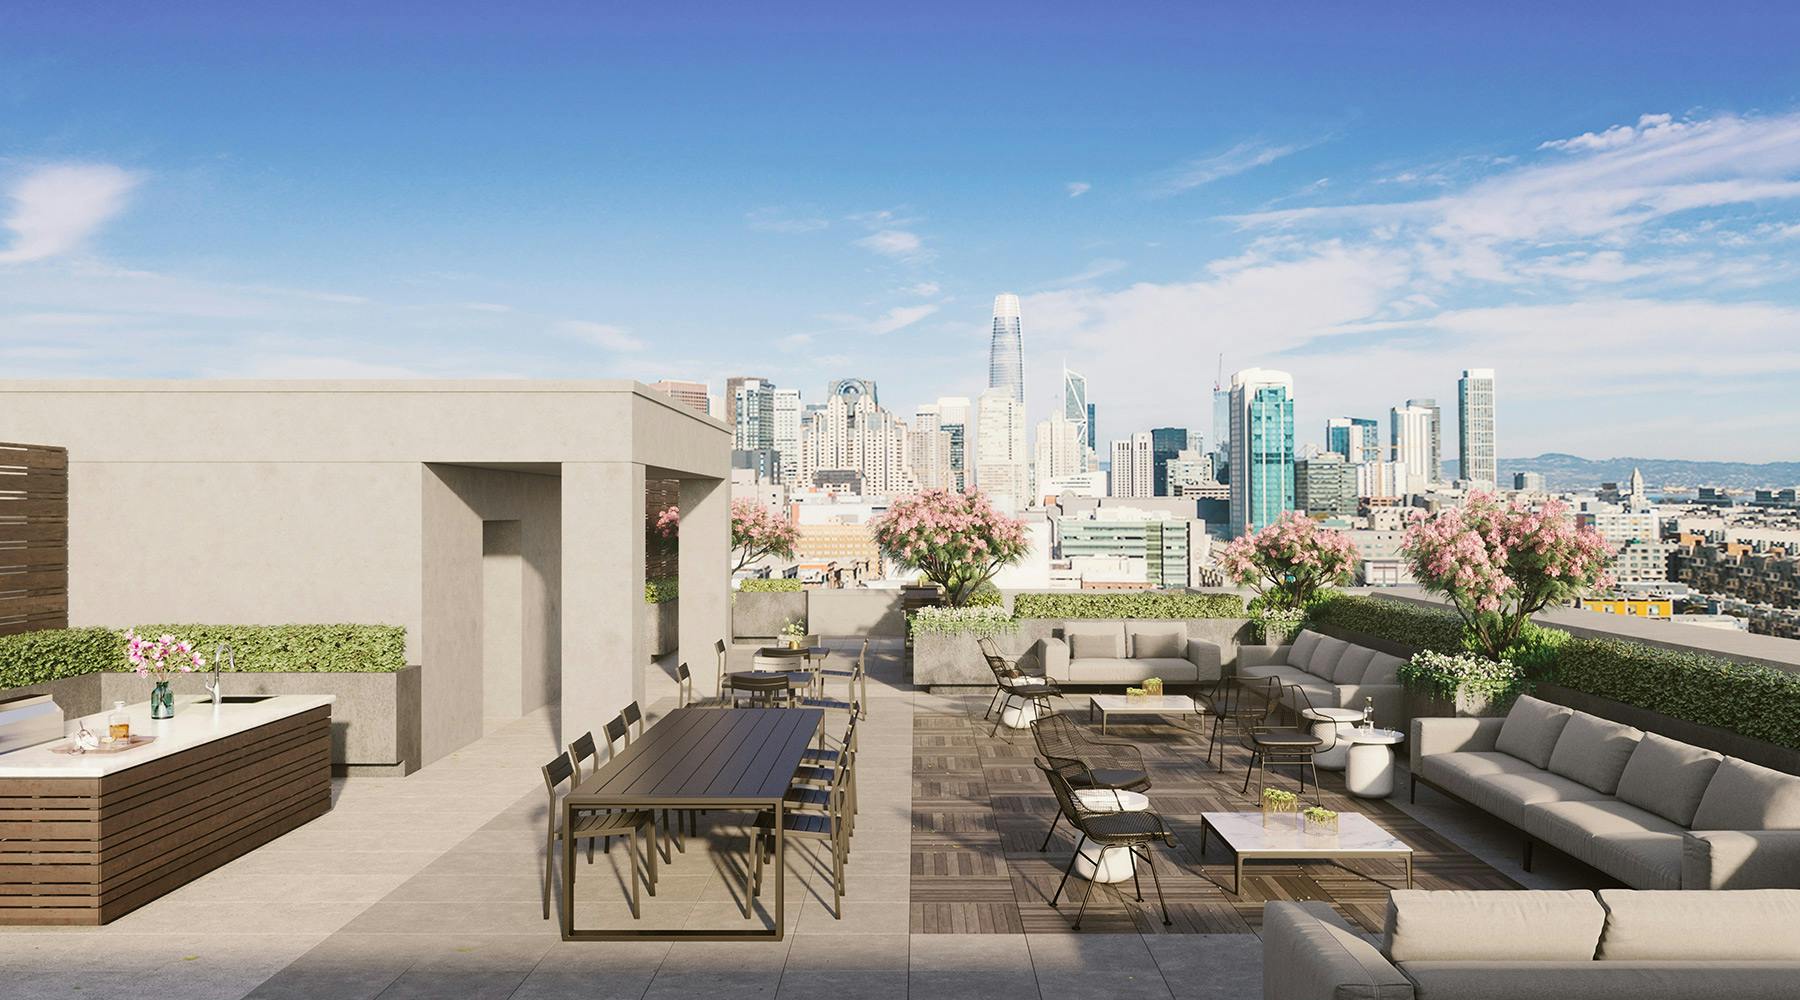 The rooftop terrace at OneEleven SF is adorned with lounge seating, a barbecue island, and dining area. It has access to impressive views of the San Francisco City Skyline. 